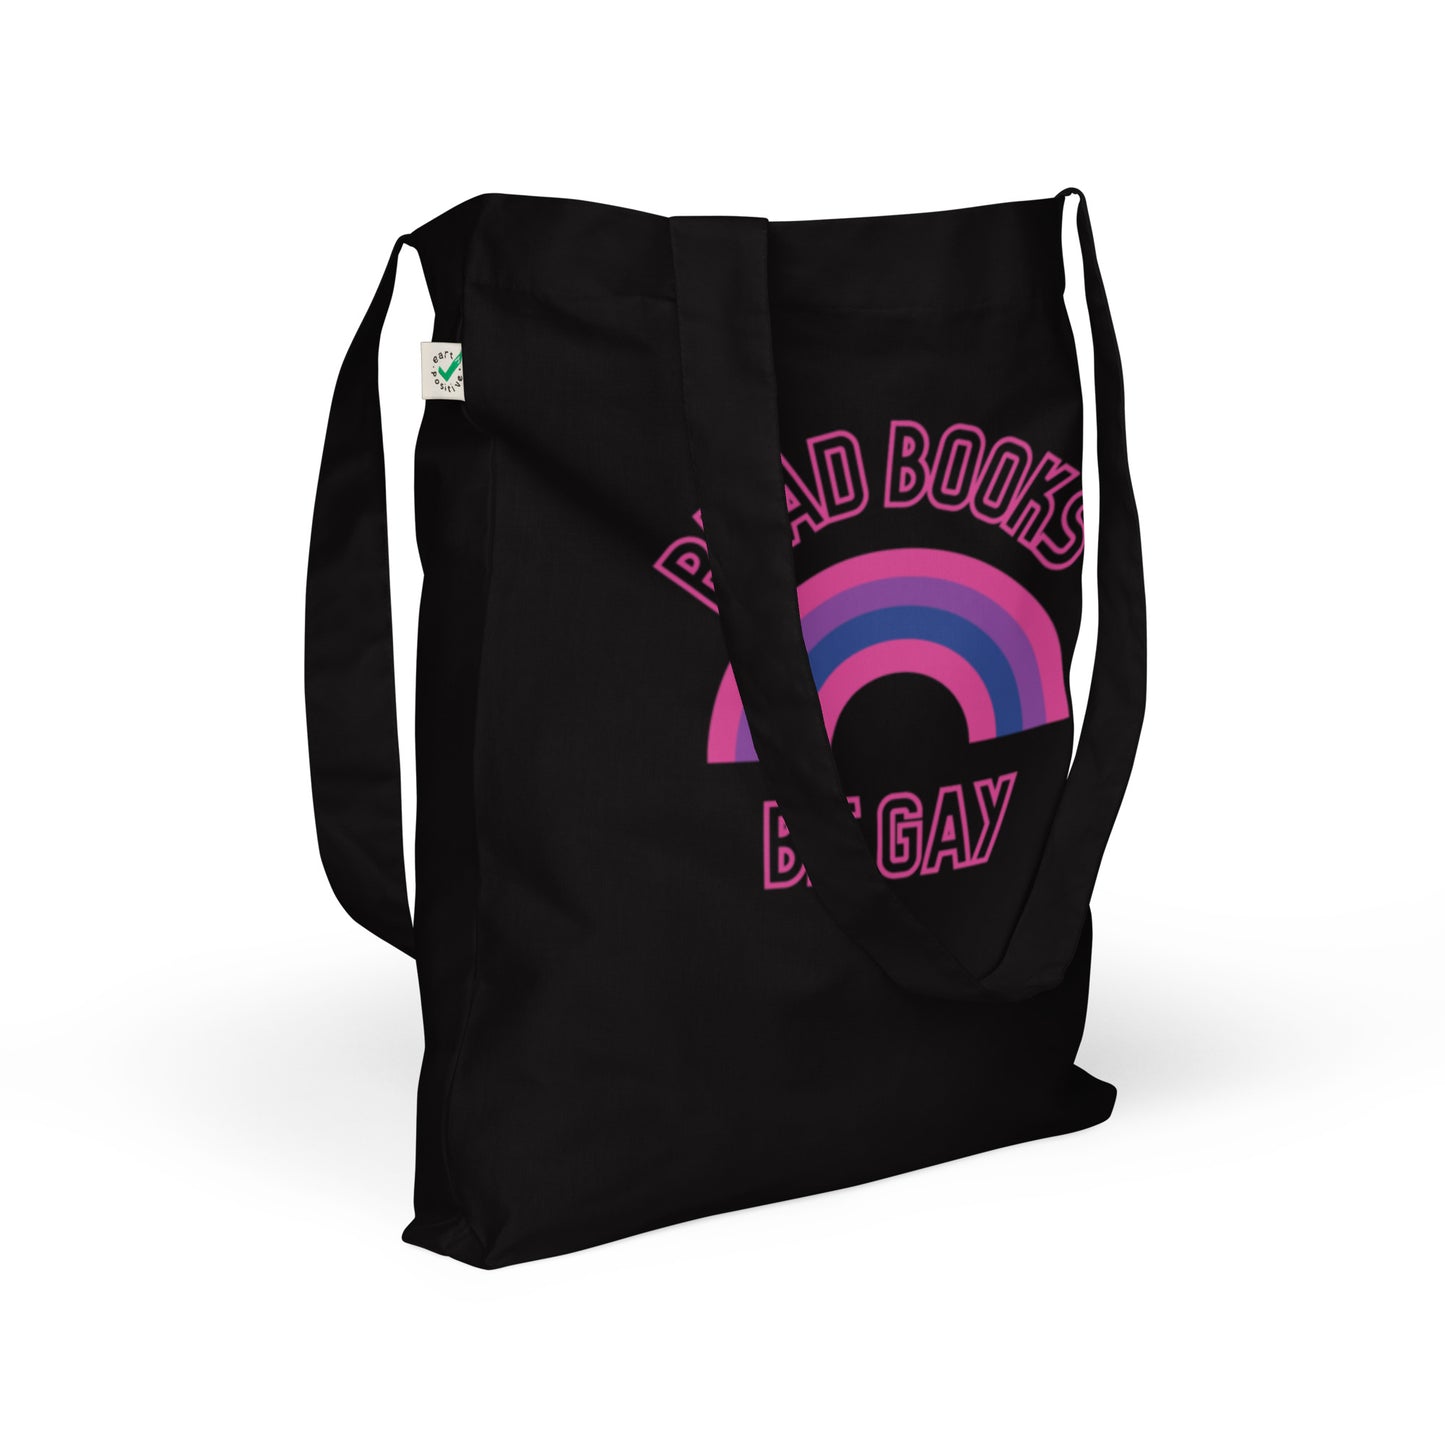 Read Books Be Gay (Bisexual Colors) Organic Fashion Tote Bag